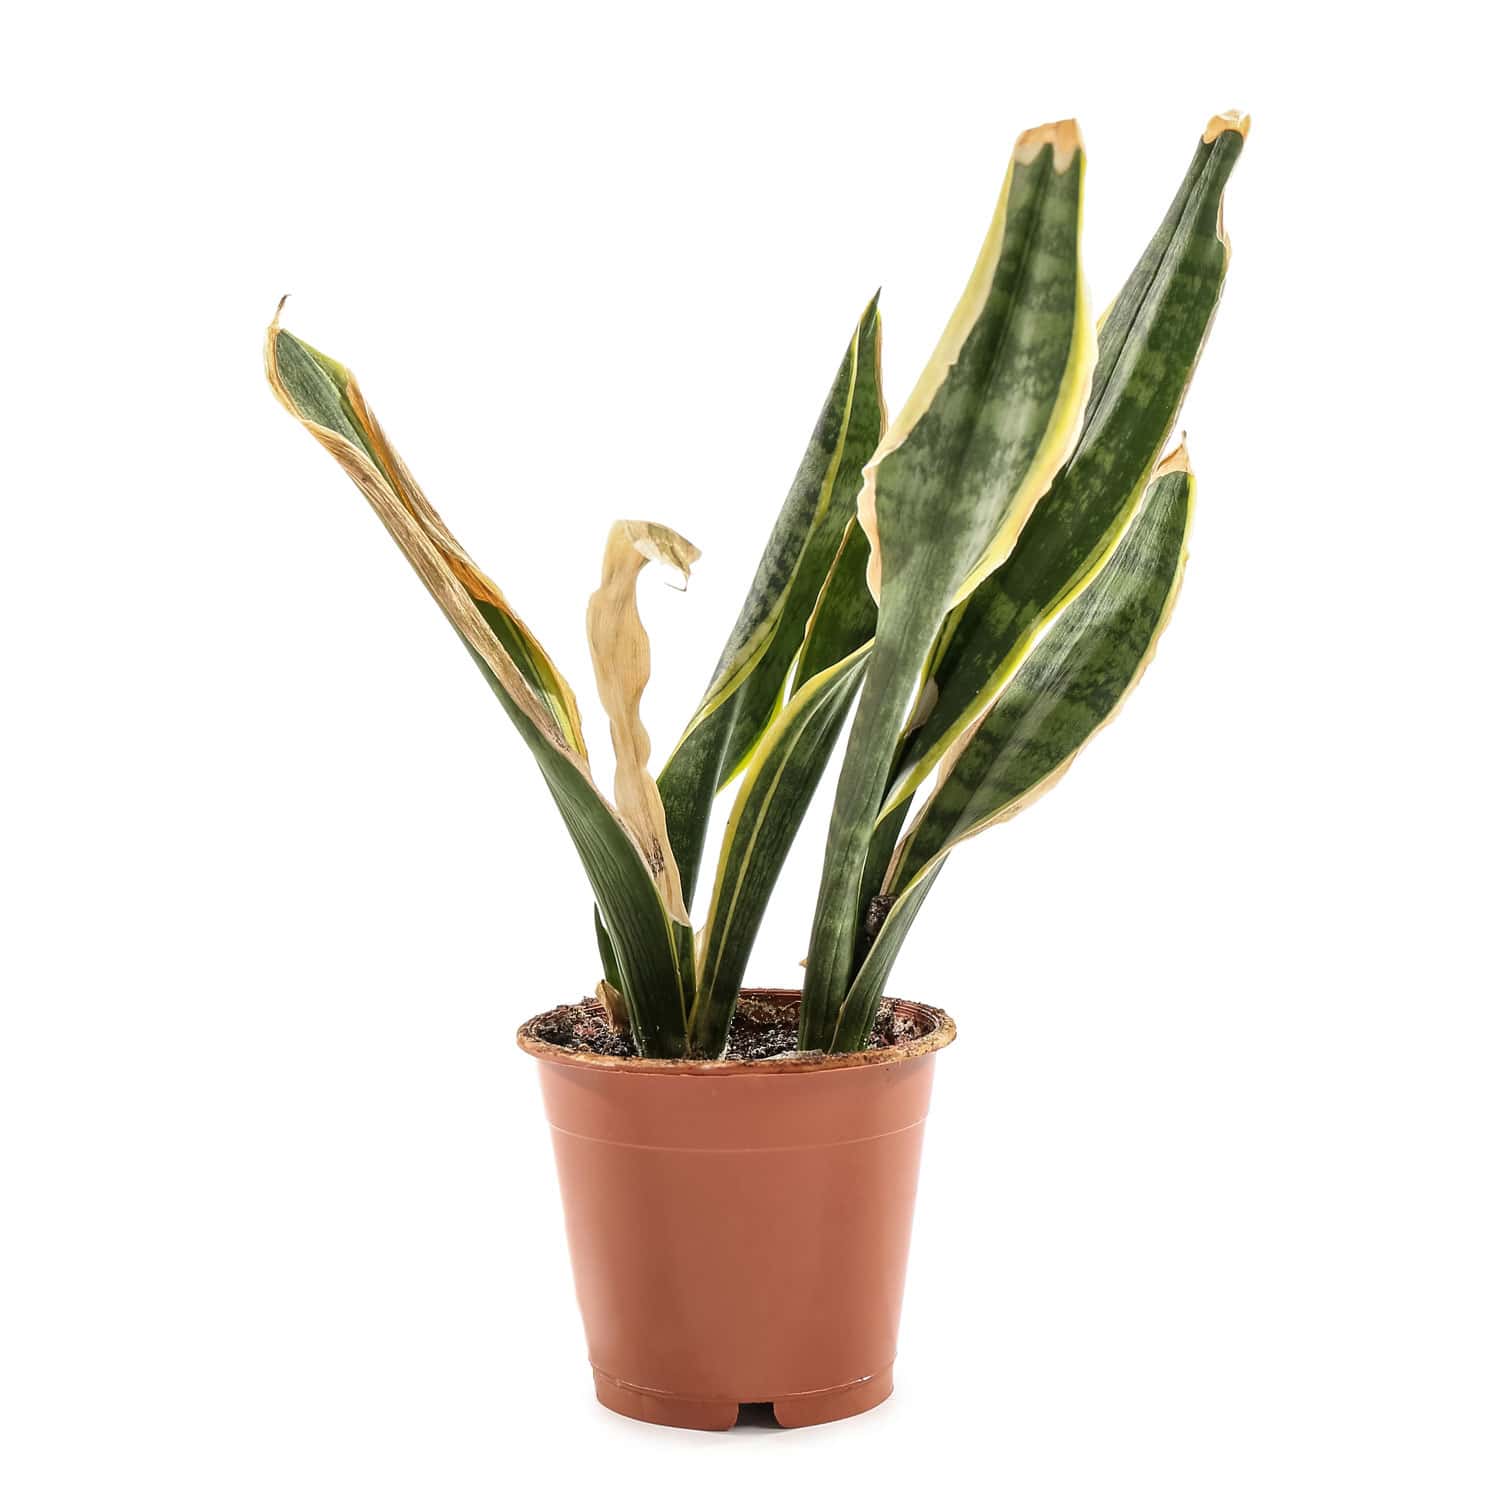 Yellowing leaves of a snake plant